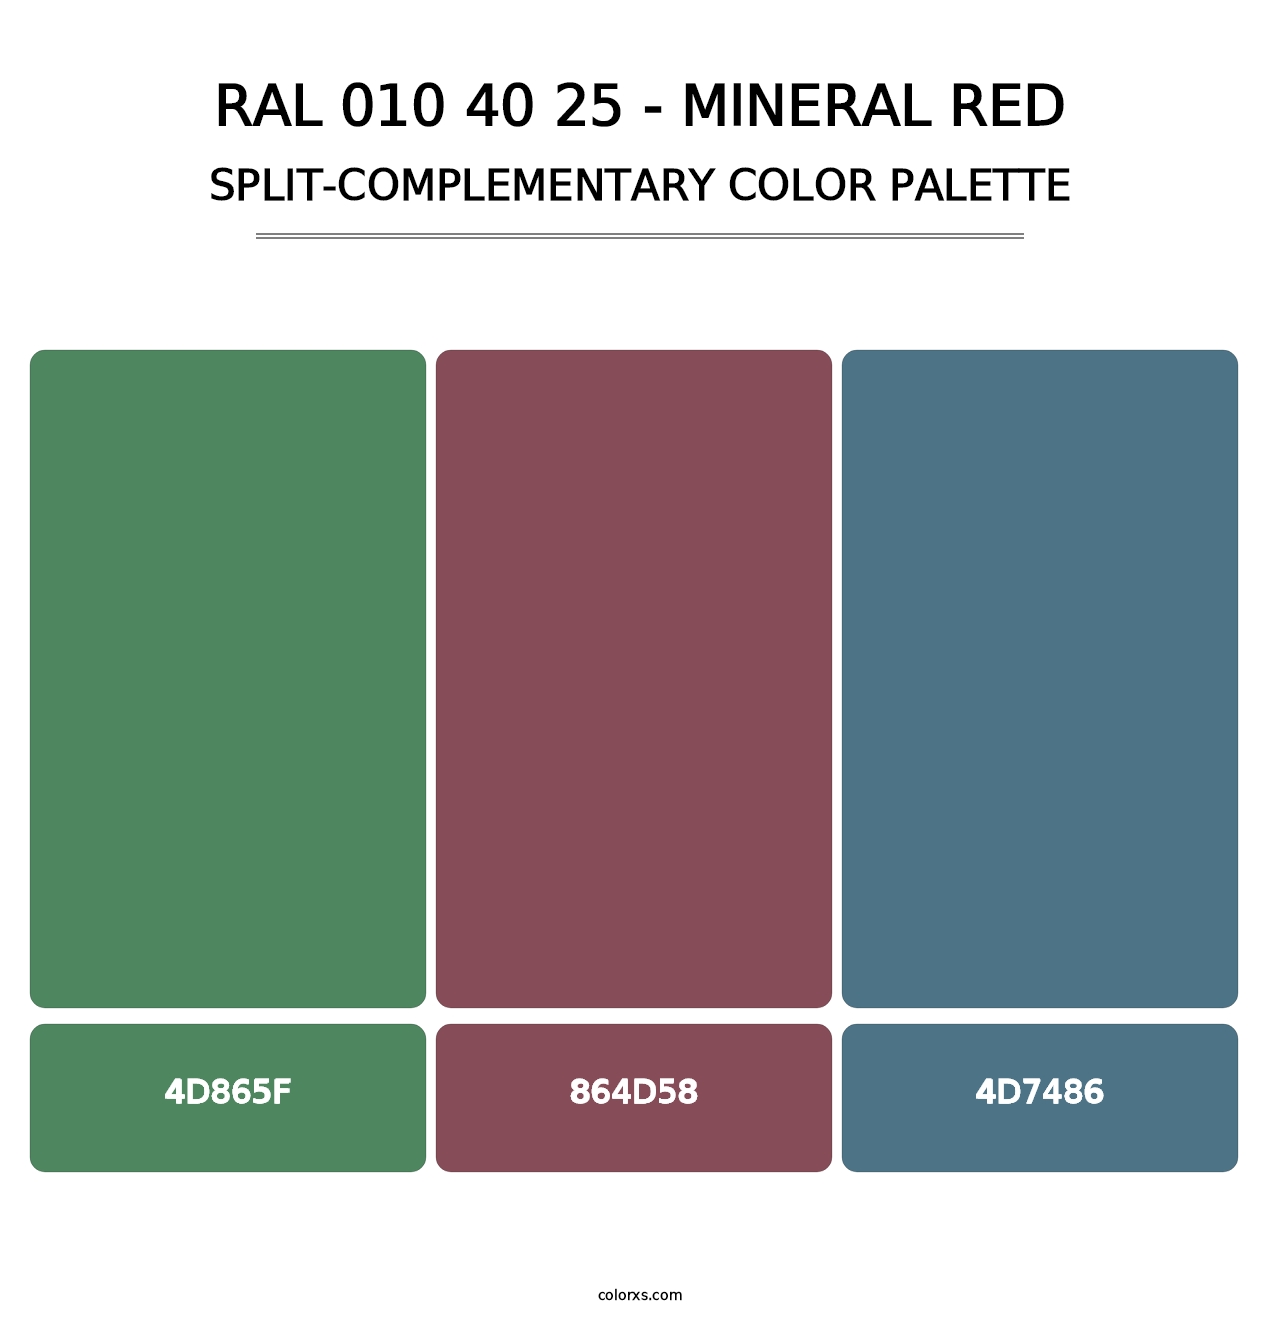 RAL 010 40 25 - Mineral Red - Split-Complementary Color Palette